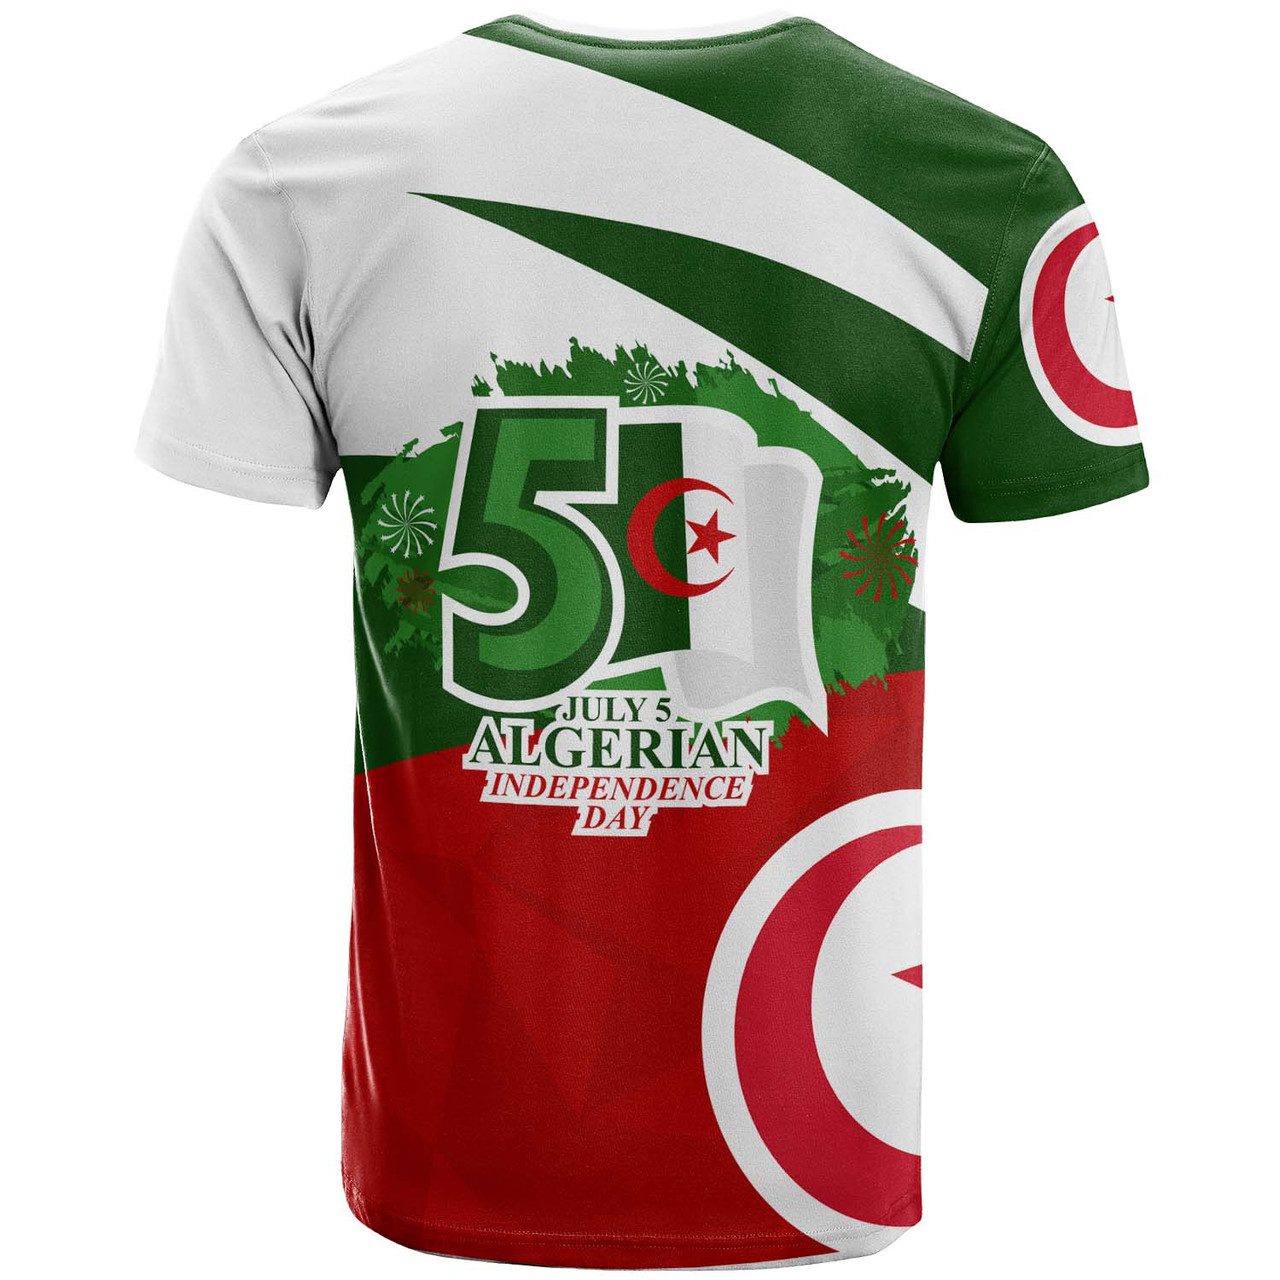 Algeria T-shirt – Algerian Independence Day with Fennec Fox T-shirt